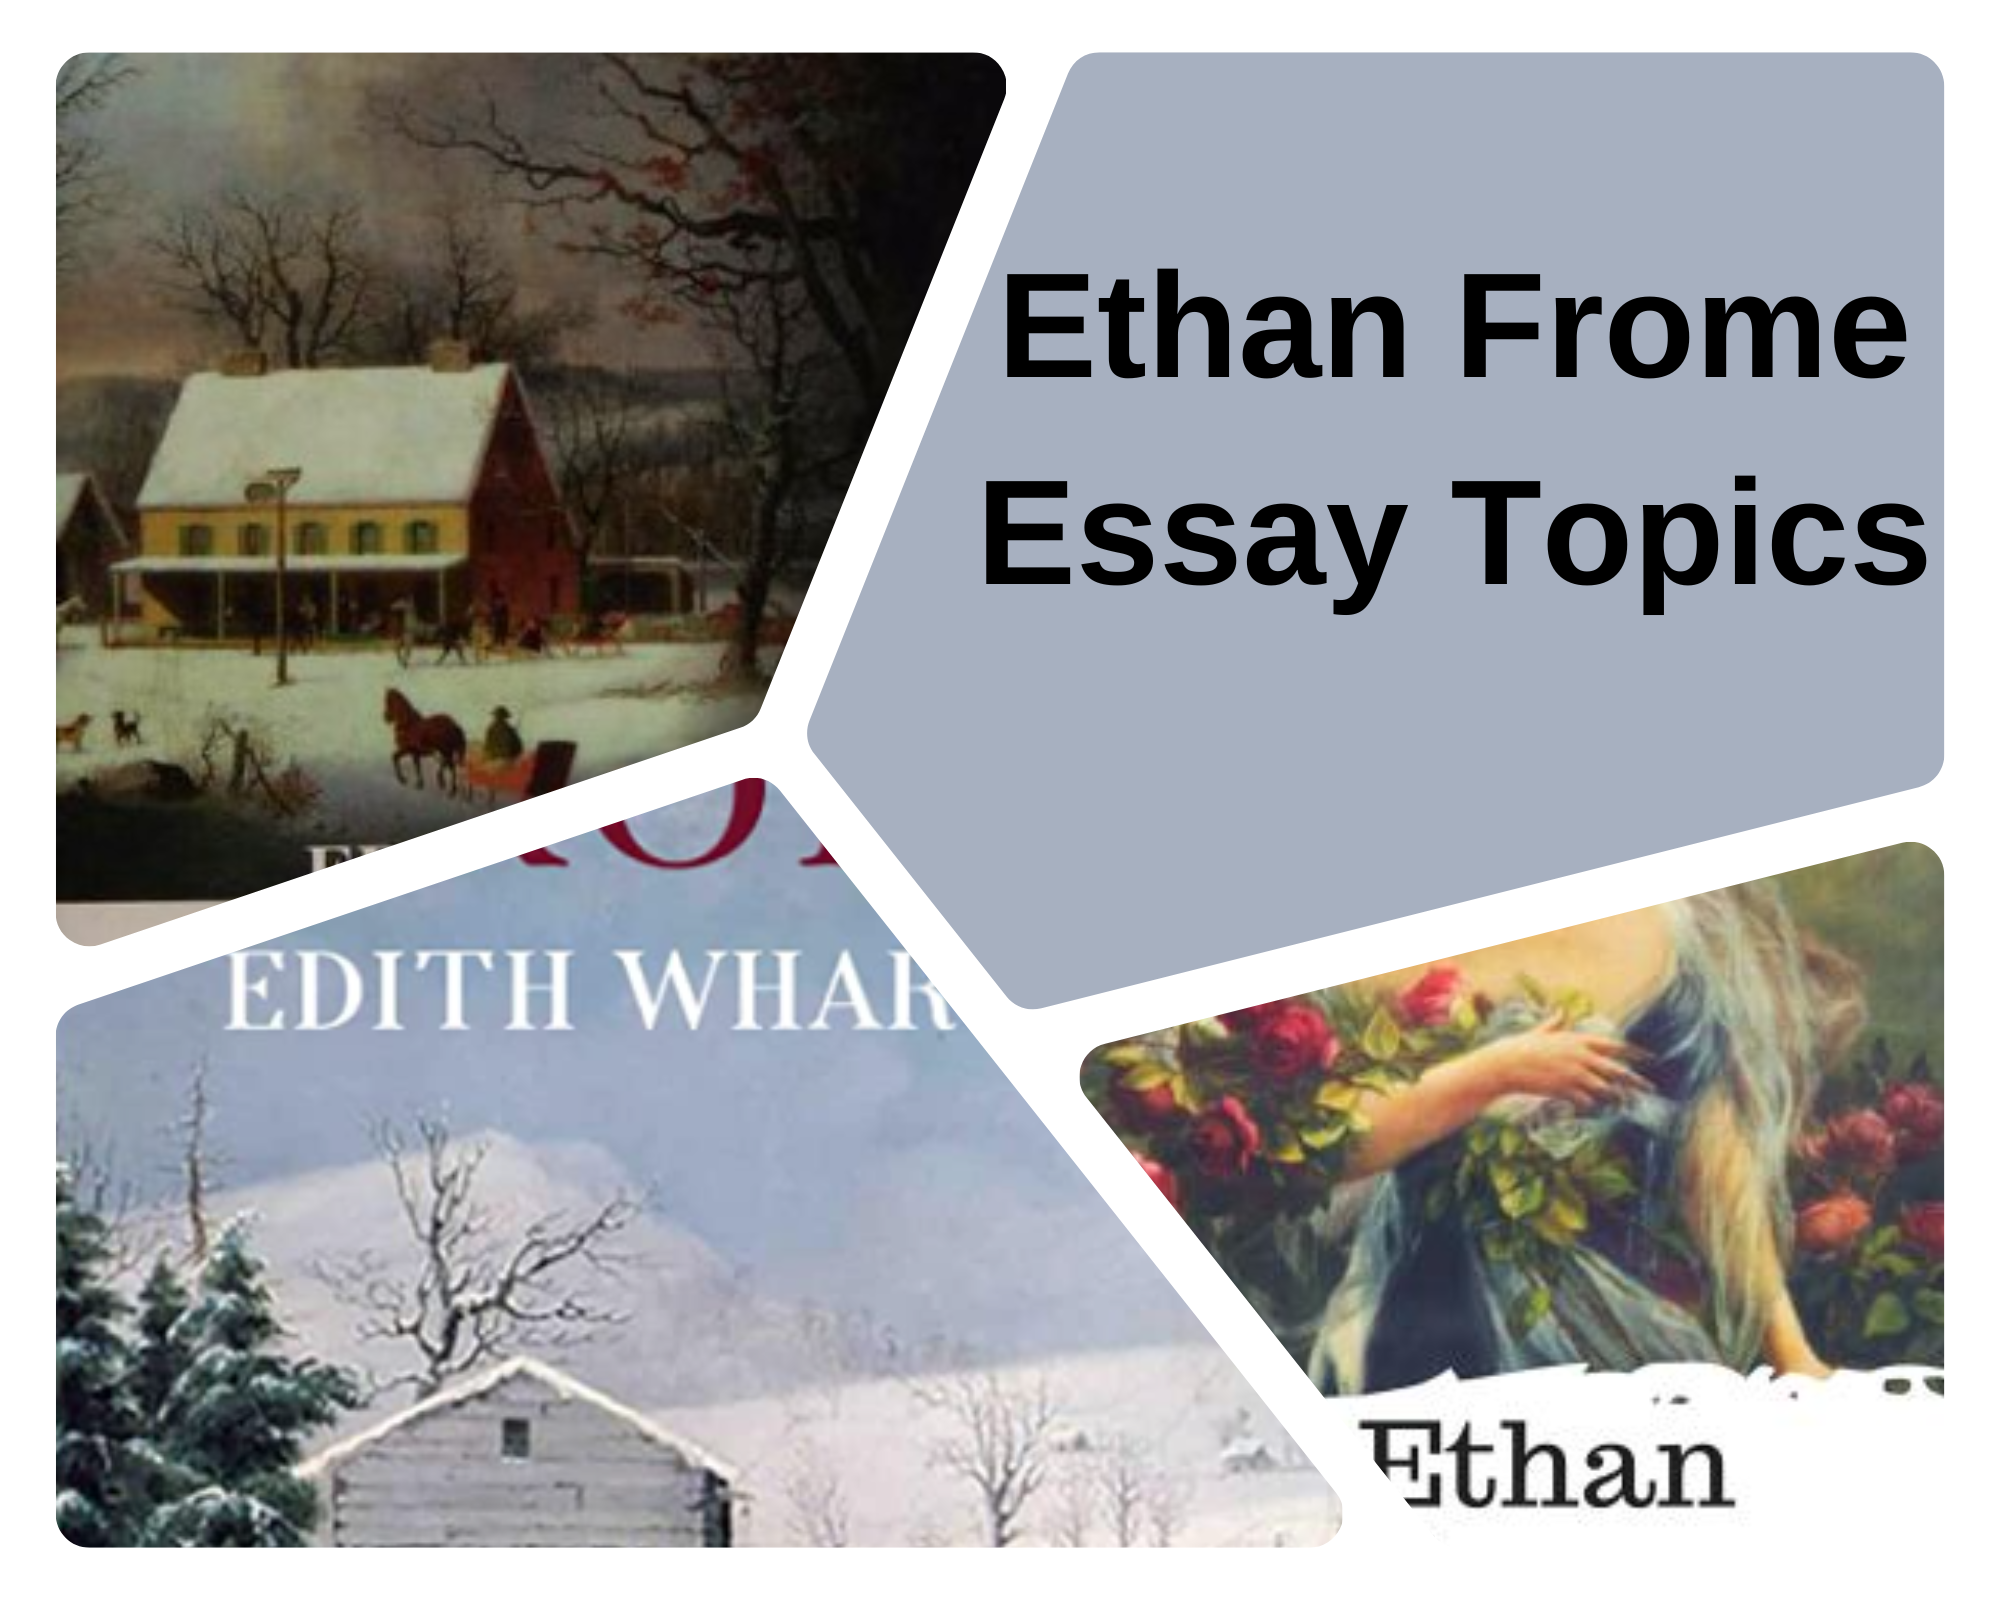 Ethan Frome Essay Topics